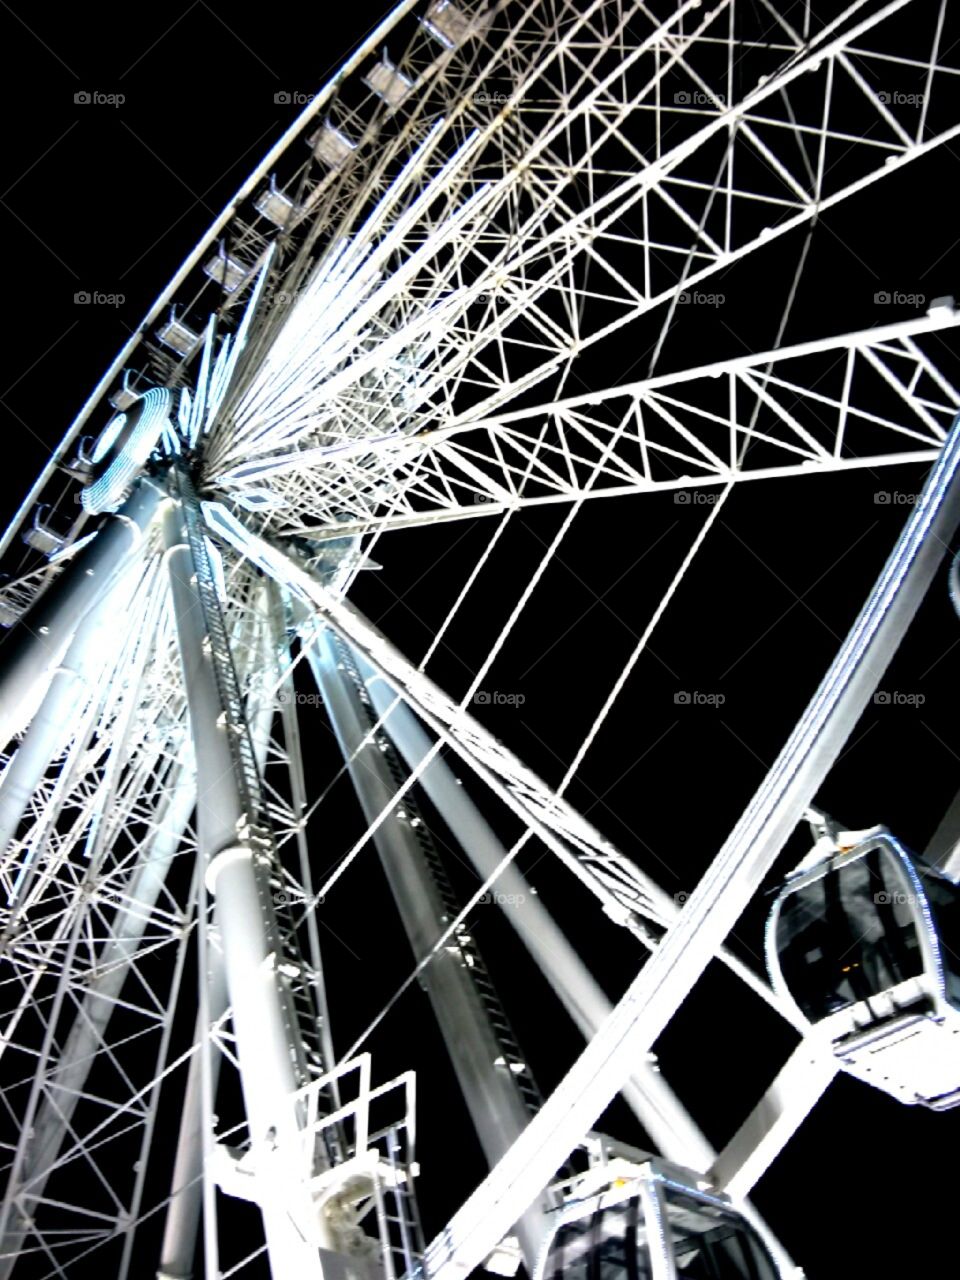 Sky Wheel Ferris Wheel. One of the largest in the world: the Sky Wheel. Located at the famous Niagara Falls (Canadian side). Hope you're not scared of heights!